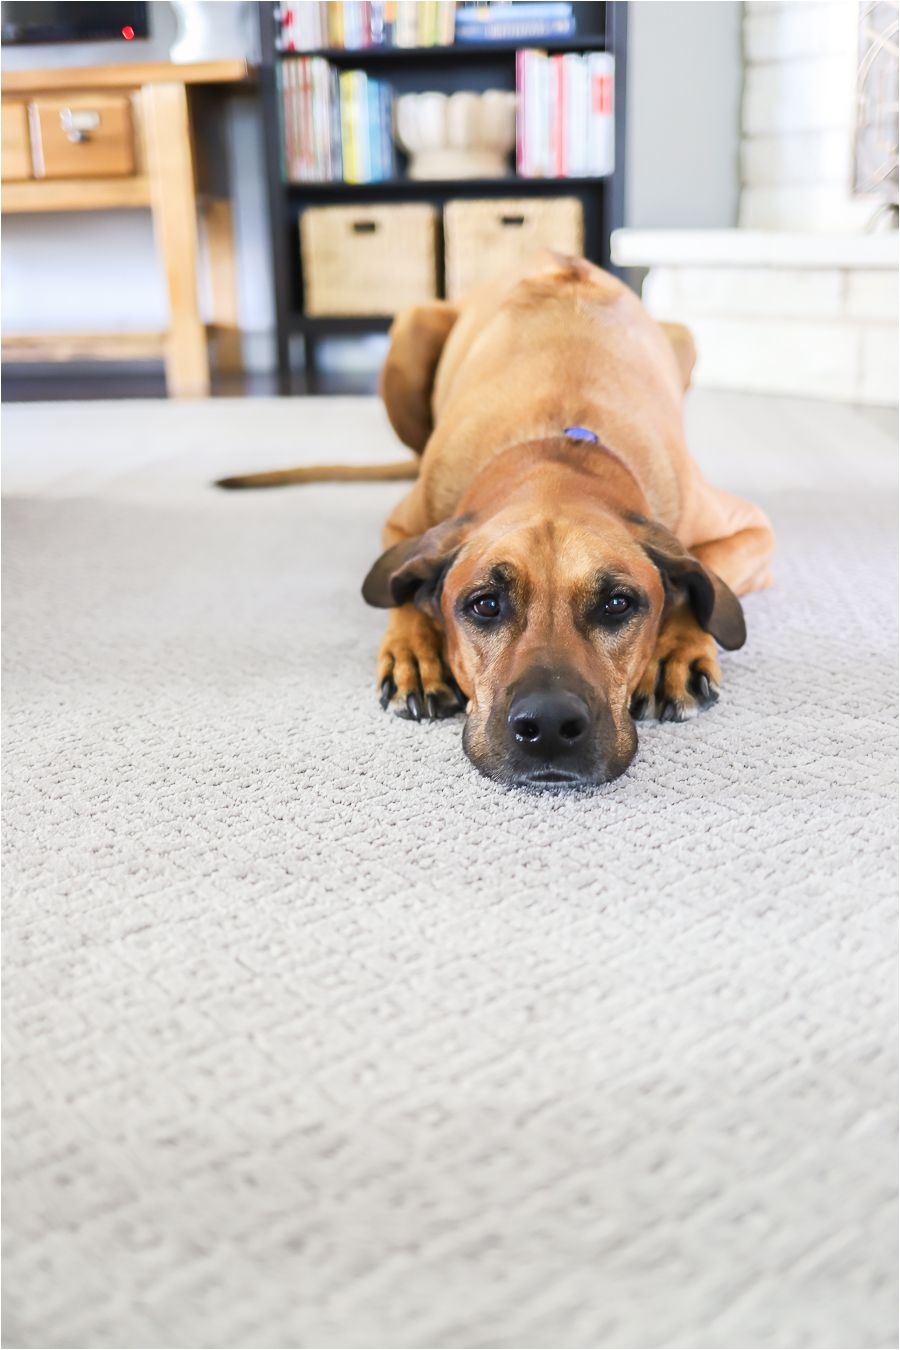 petproof from the home depot is the best pet friendly carpet